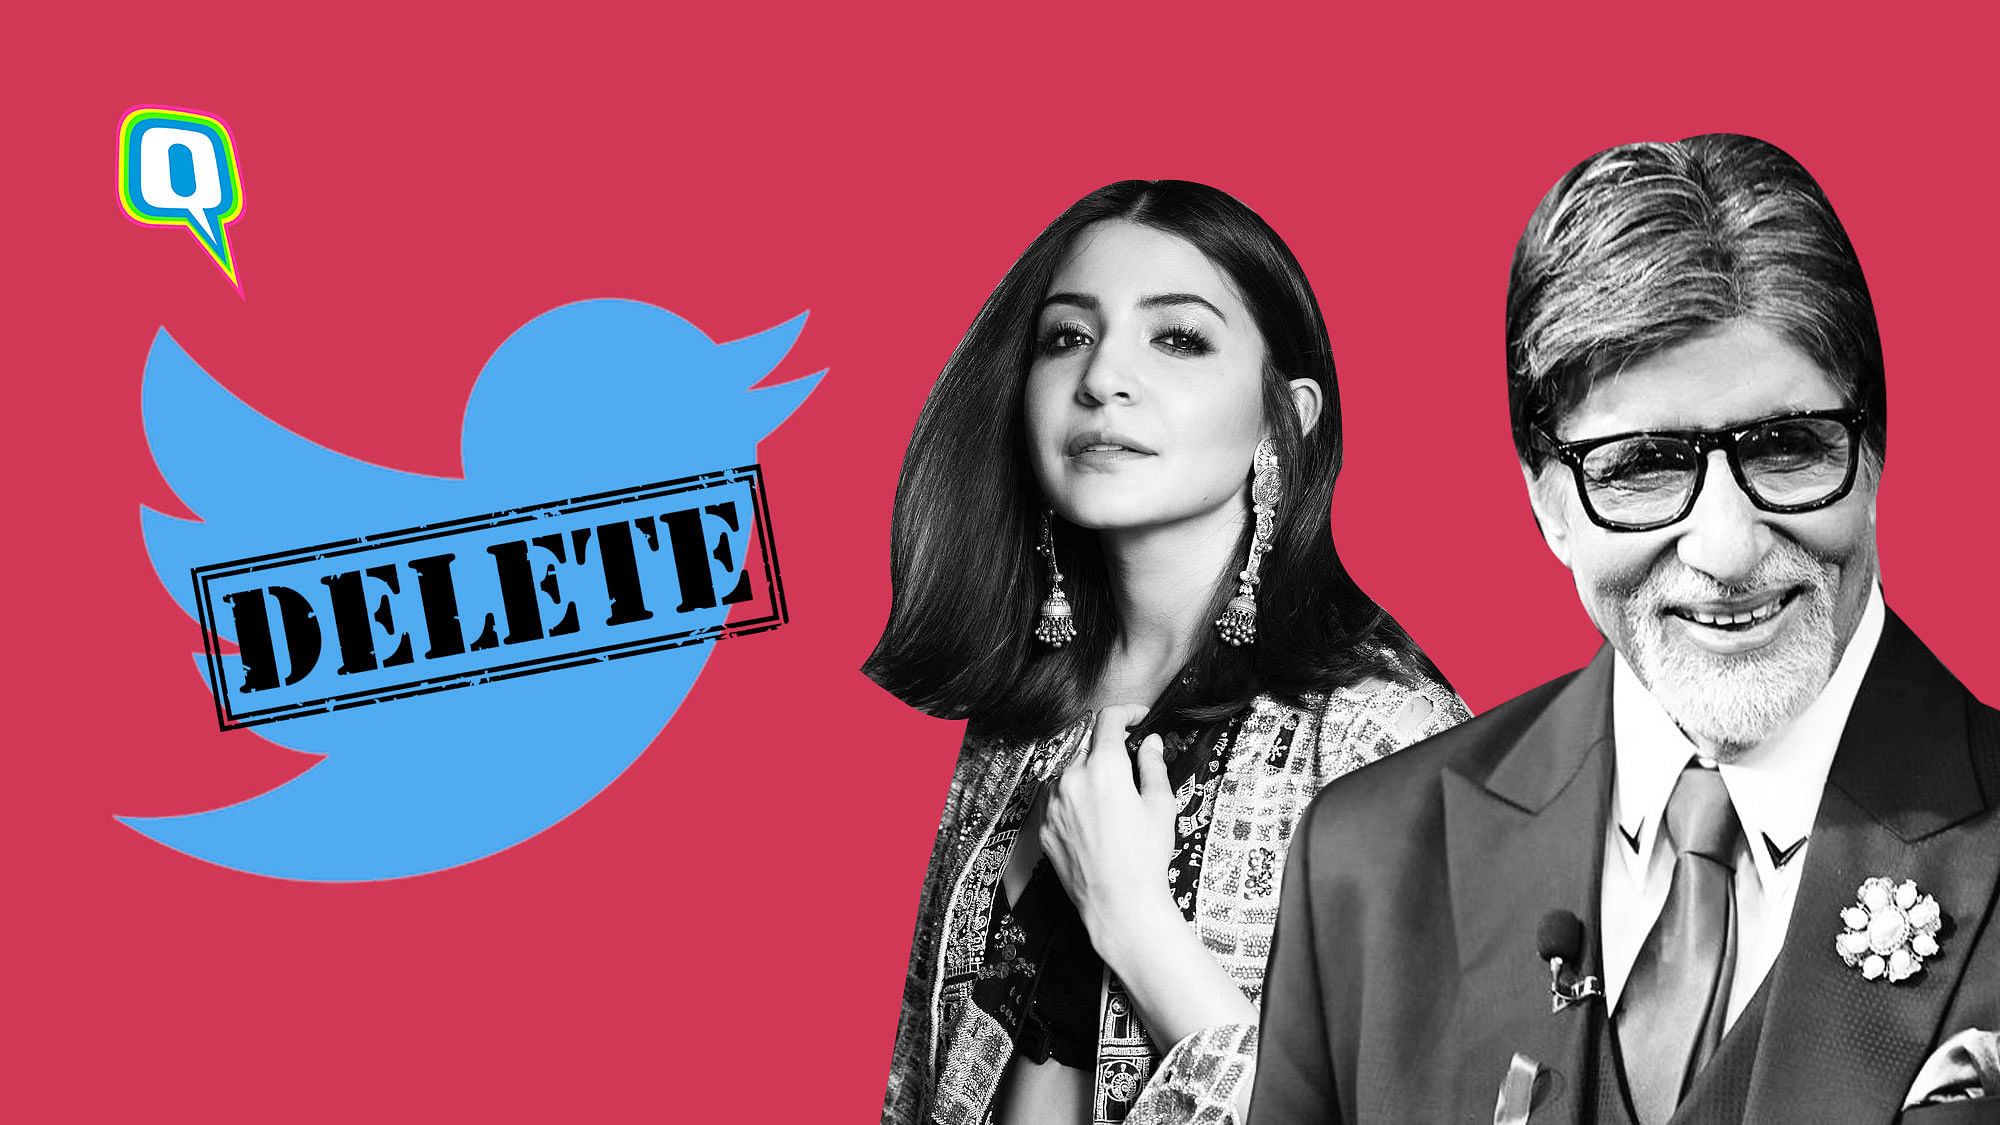 6 Deleted Tweets by Bollywood Celebs That We’ll Never Forget